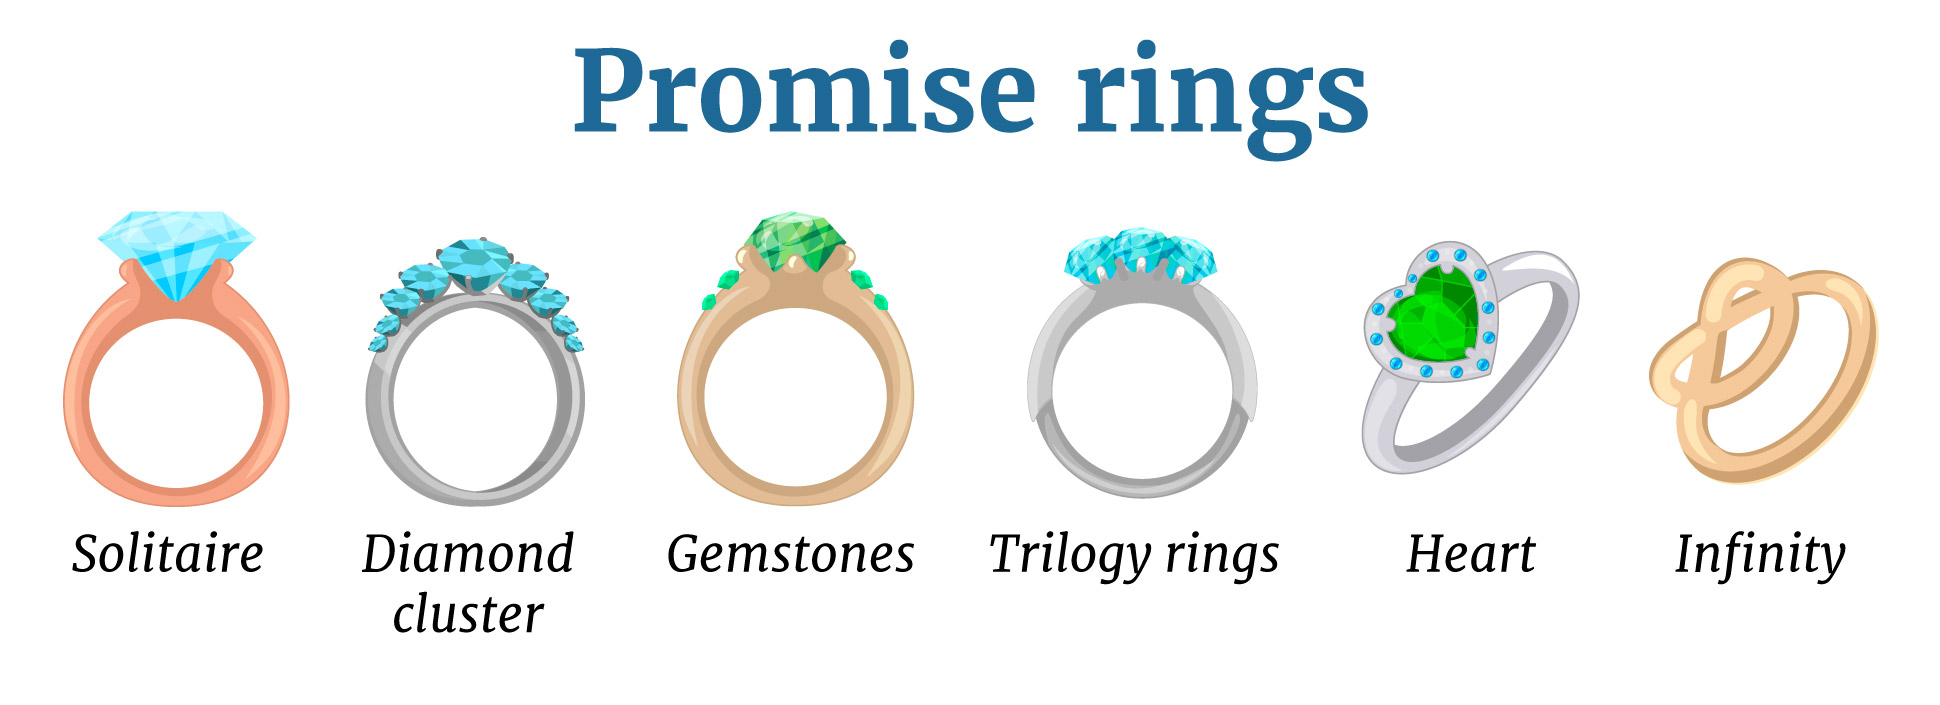 Where should you wear a promise ring